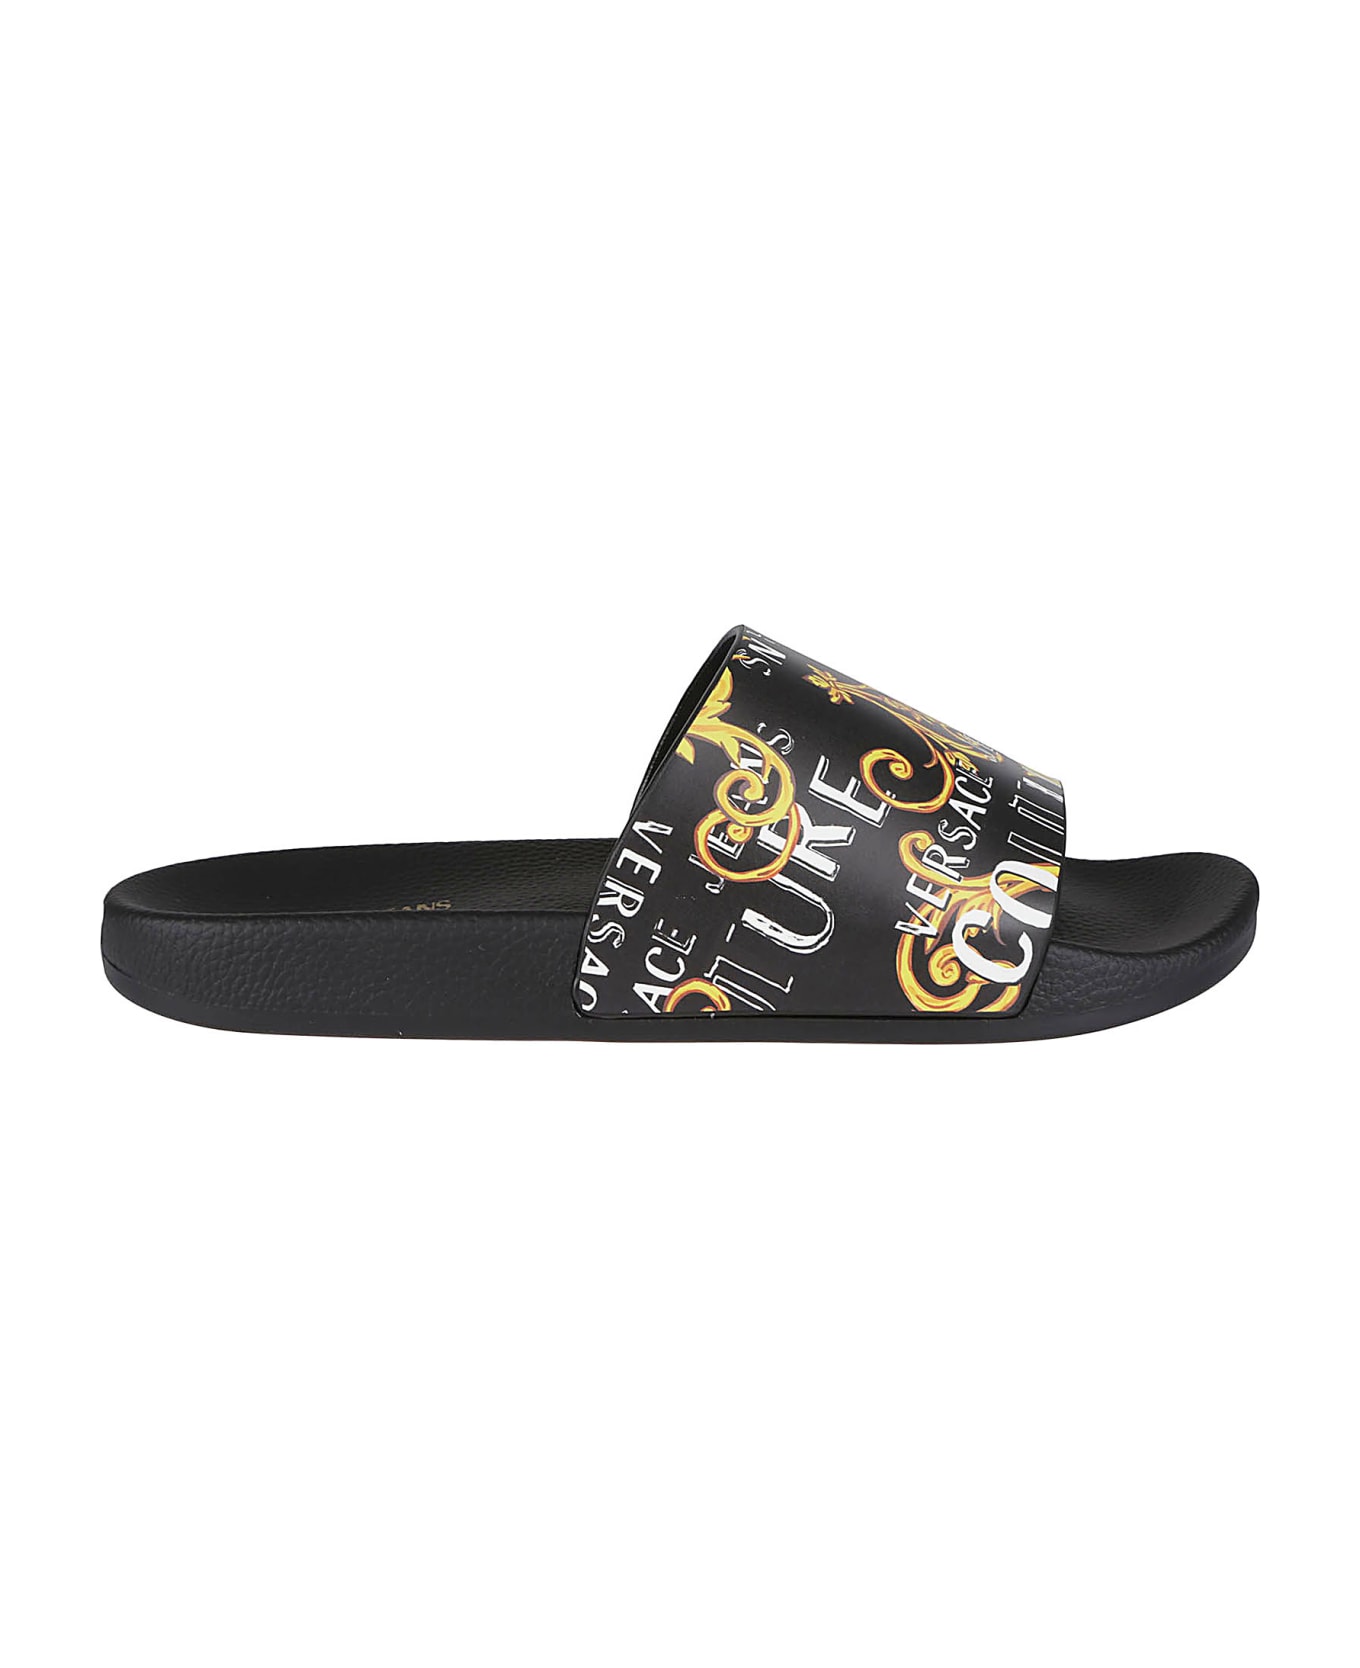 Versace Jeans Couture Gummy 38 Sliders - Black/gold